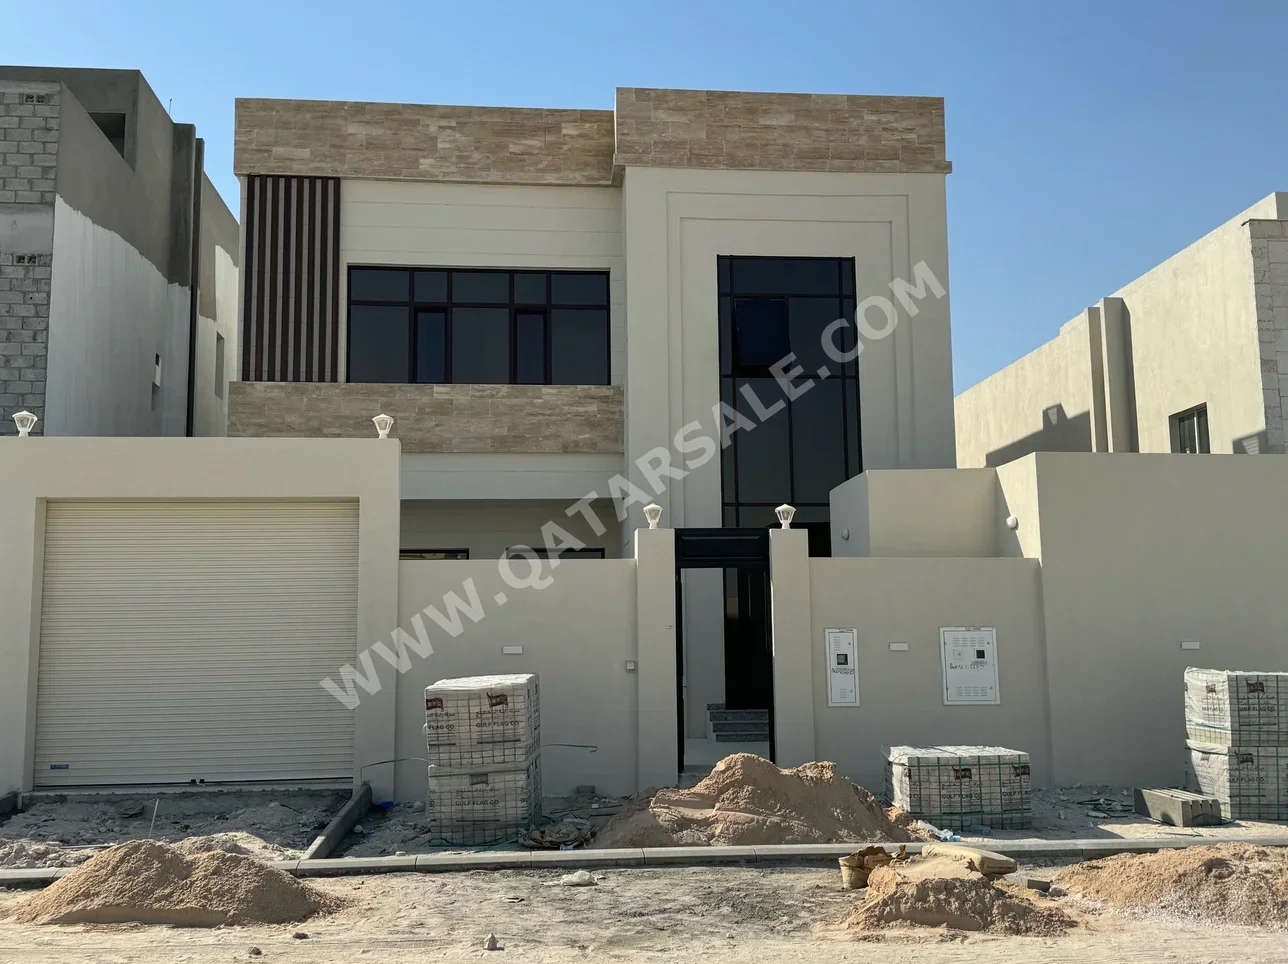 Family Residential  - Not Furnished  - Al Rayyan  - Ain Khaled  - 7 Bedrooms  - Includes Water & Electricity